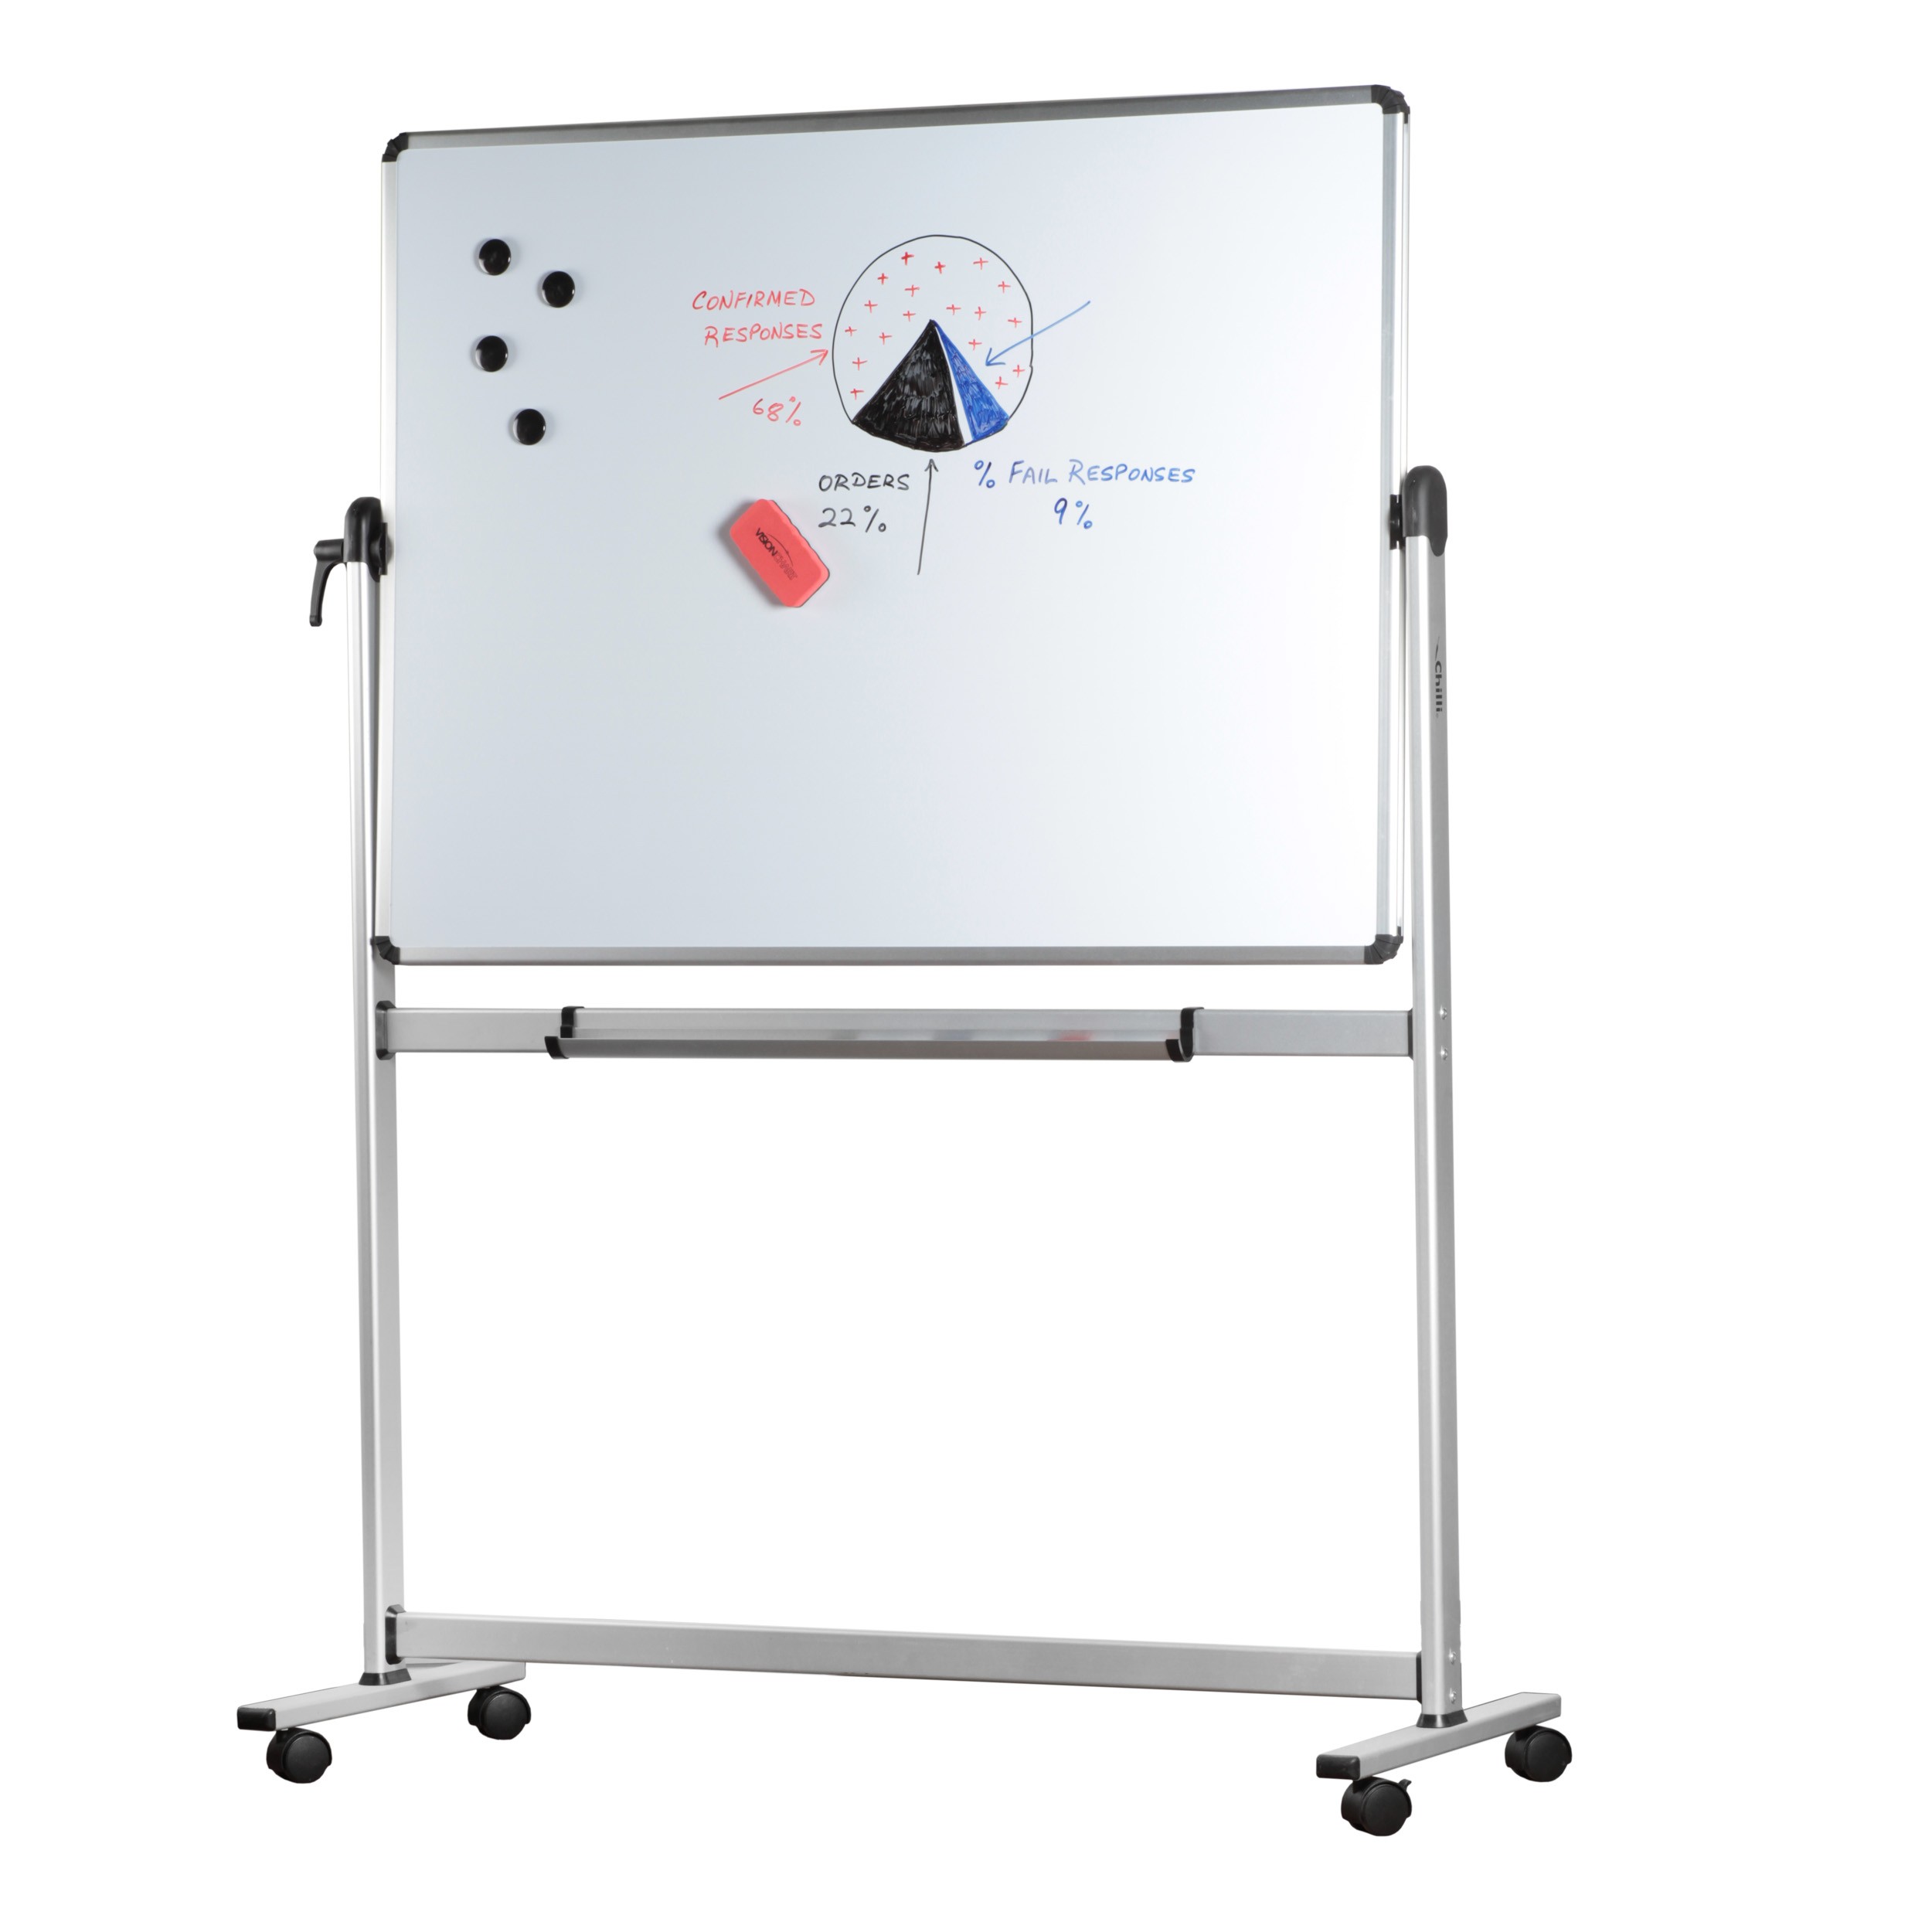 MOBILE WHITEBOARD WITH STAND 1800mm x 900mm DOUBLE SIDED